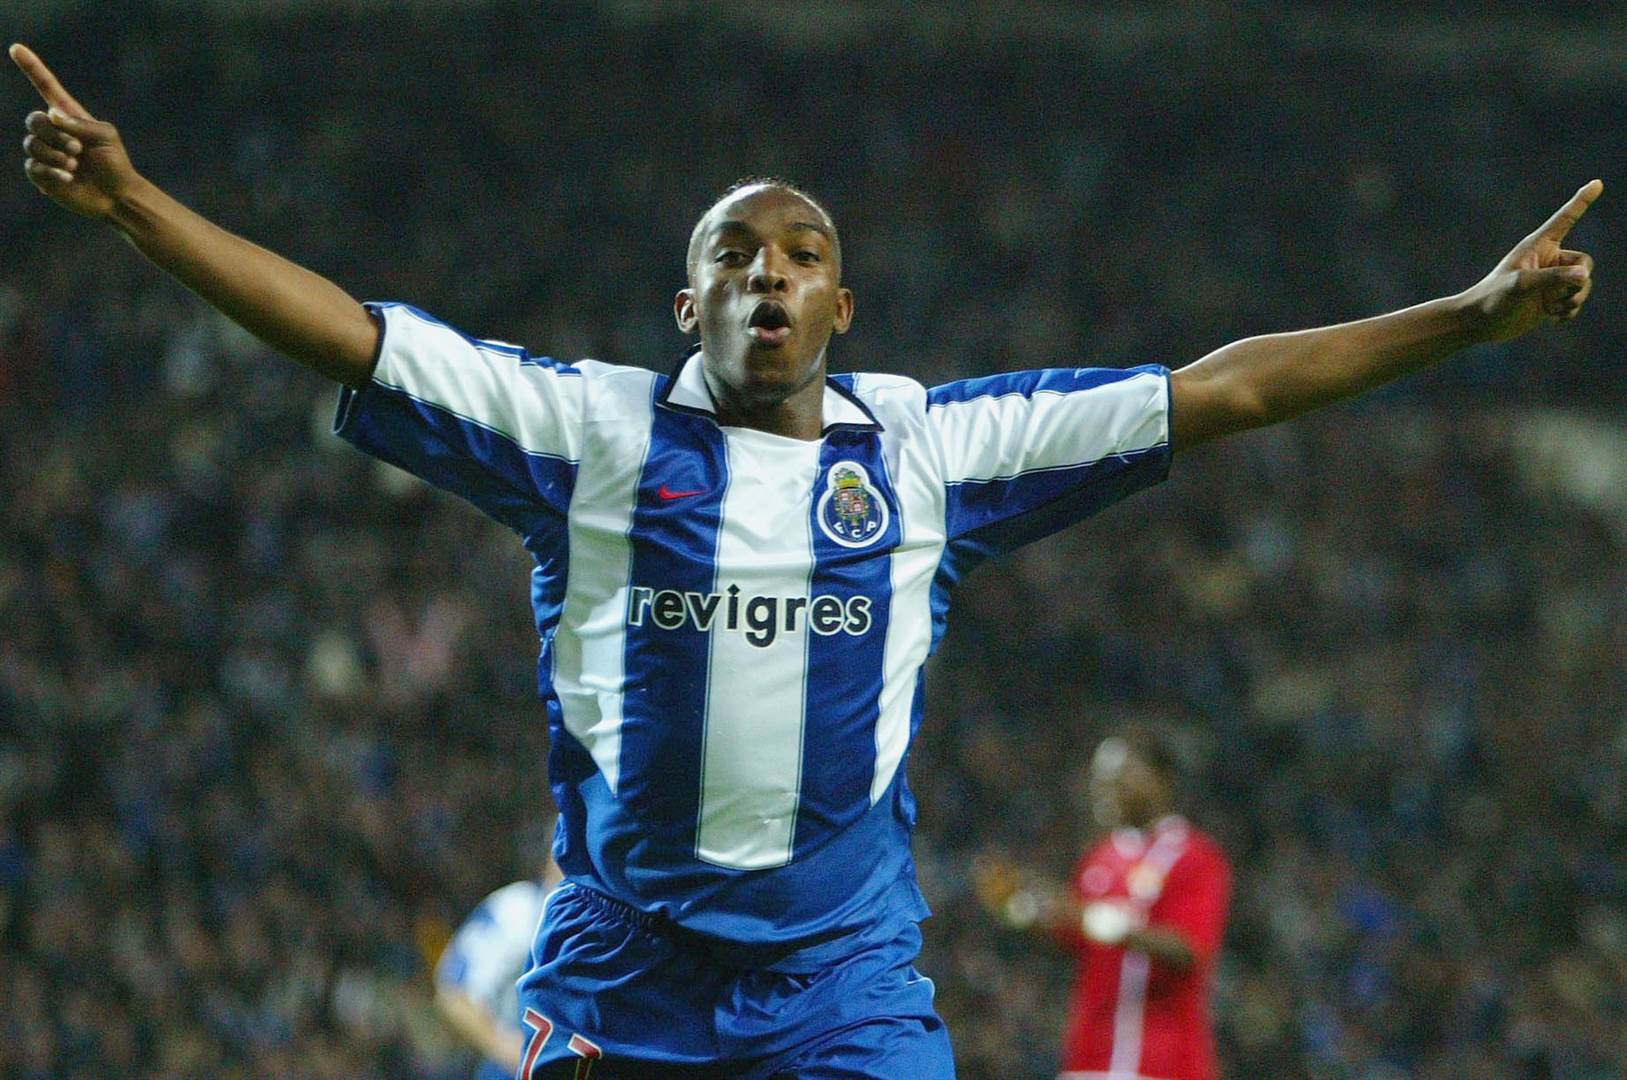 9. Benni McCarthy (South Africa) – 13 trophies 